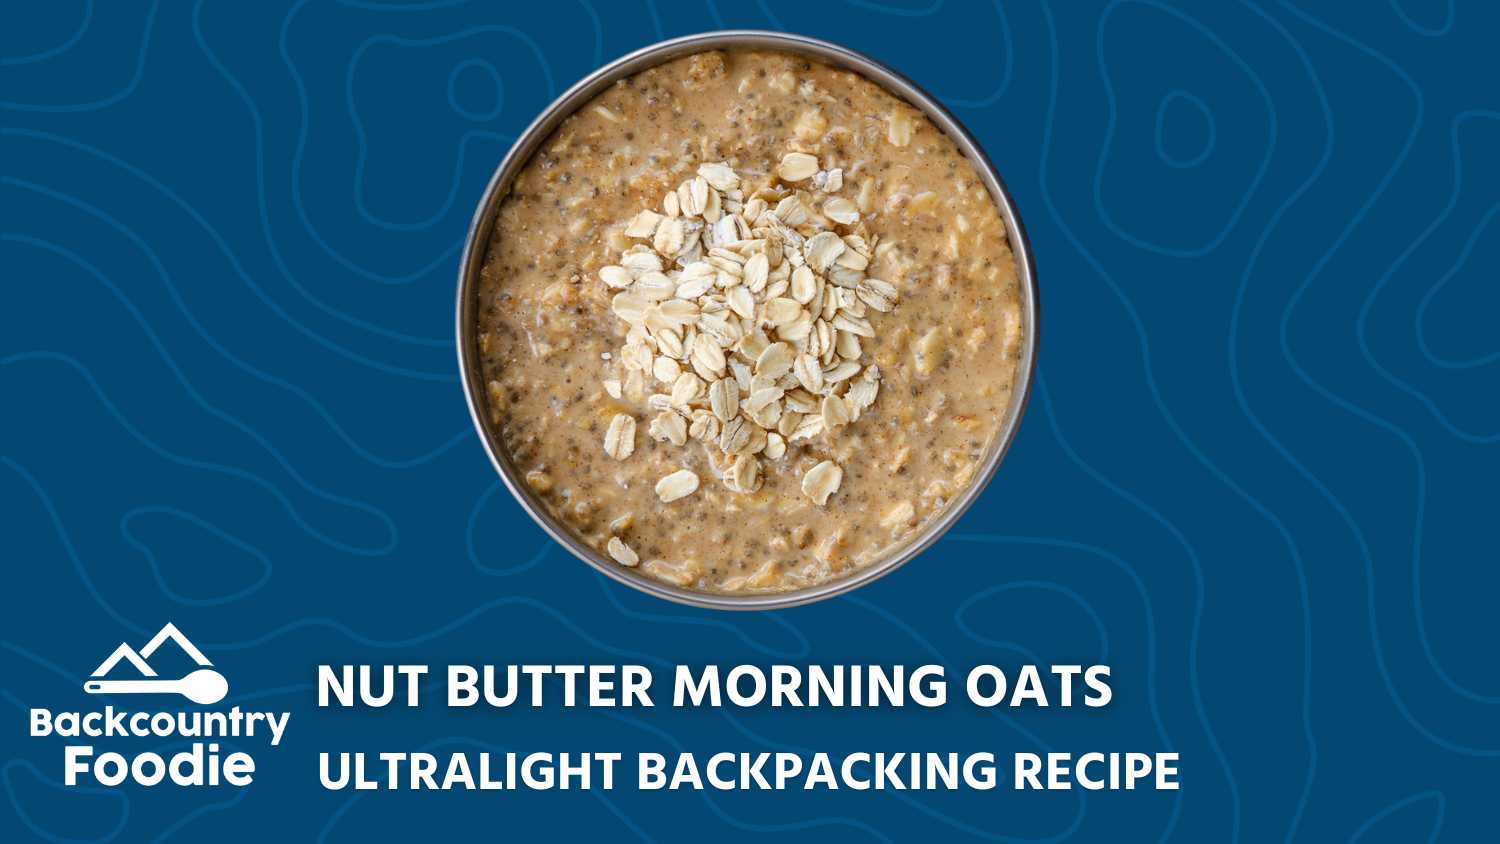 Backcountry Foodie Nut Butter Morning Oats Backpacking Recipe